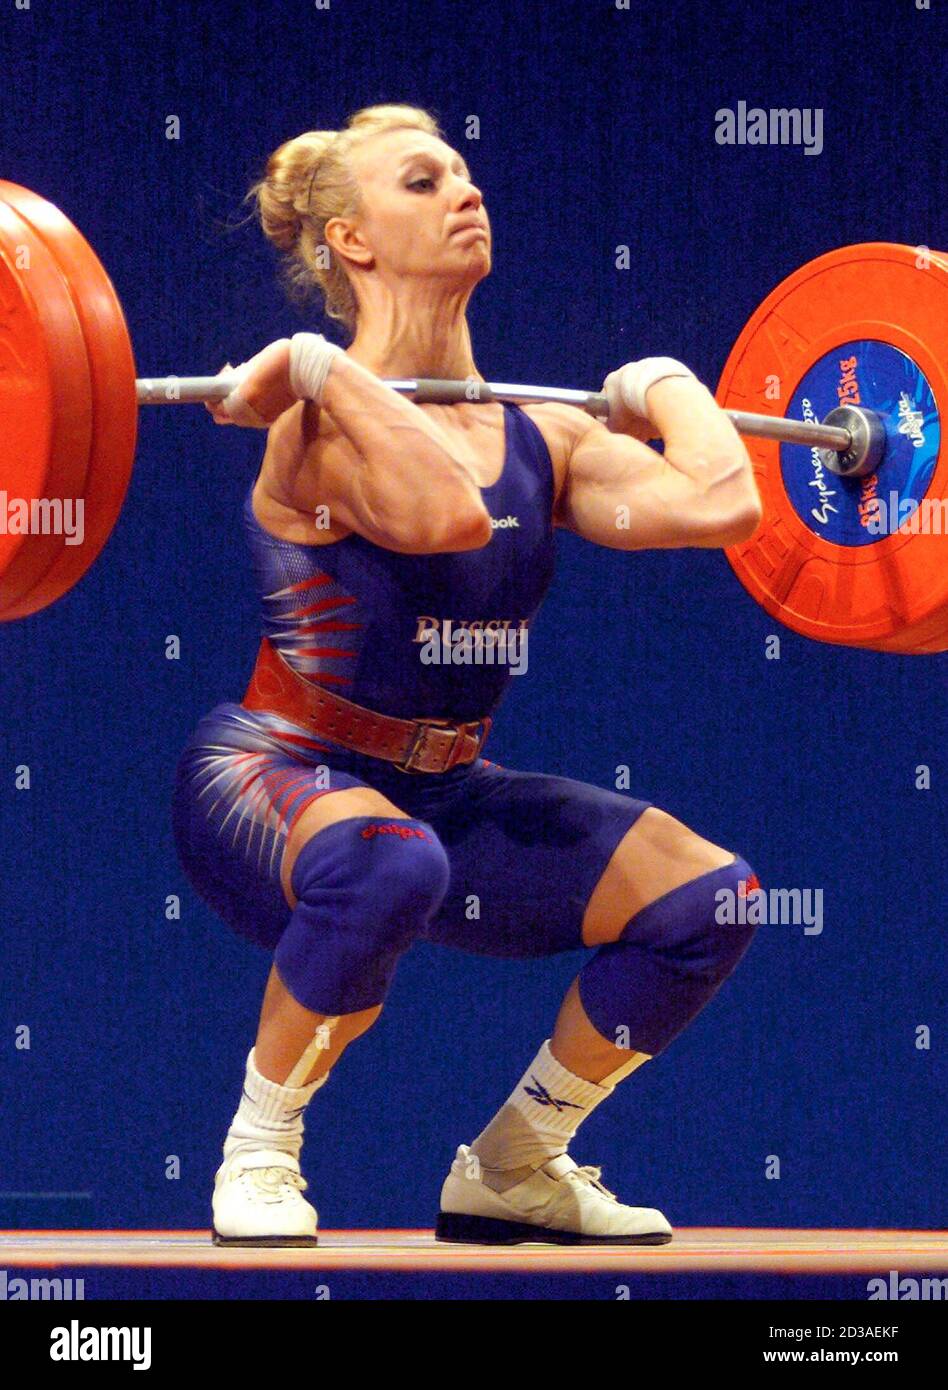 Weightlifter Blows Out Anus